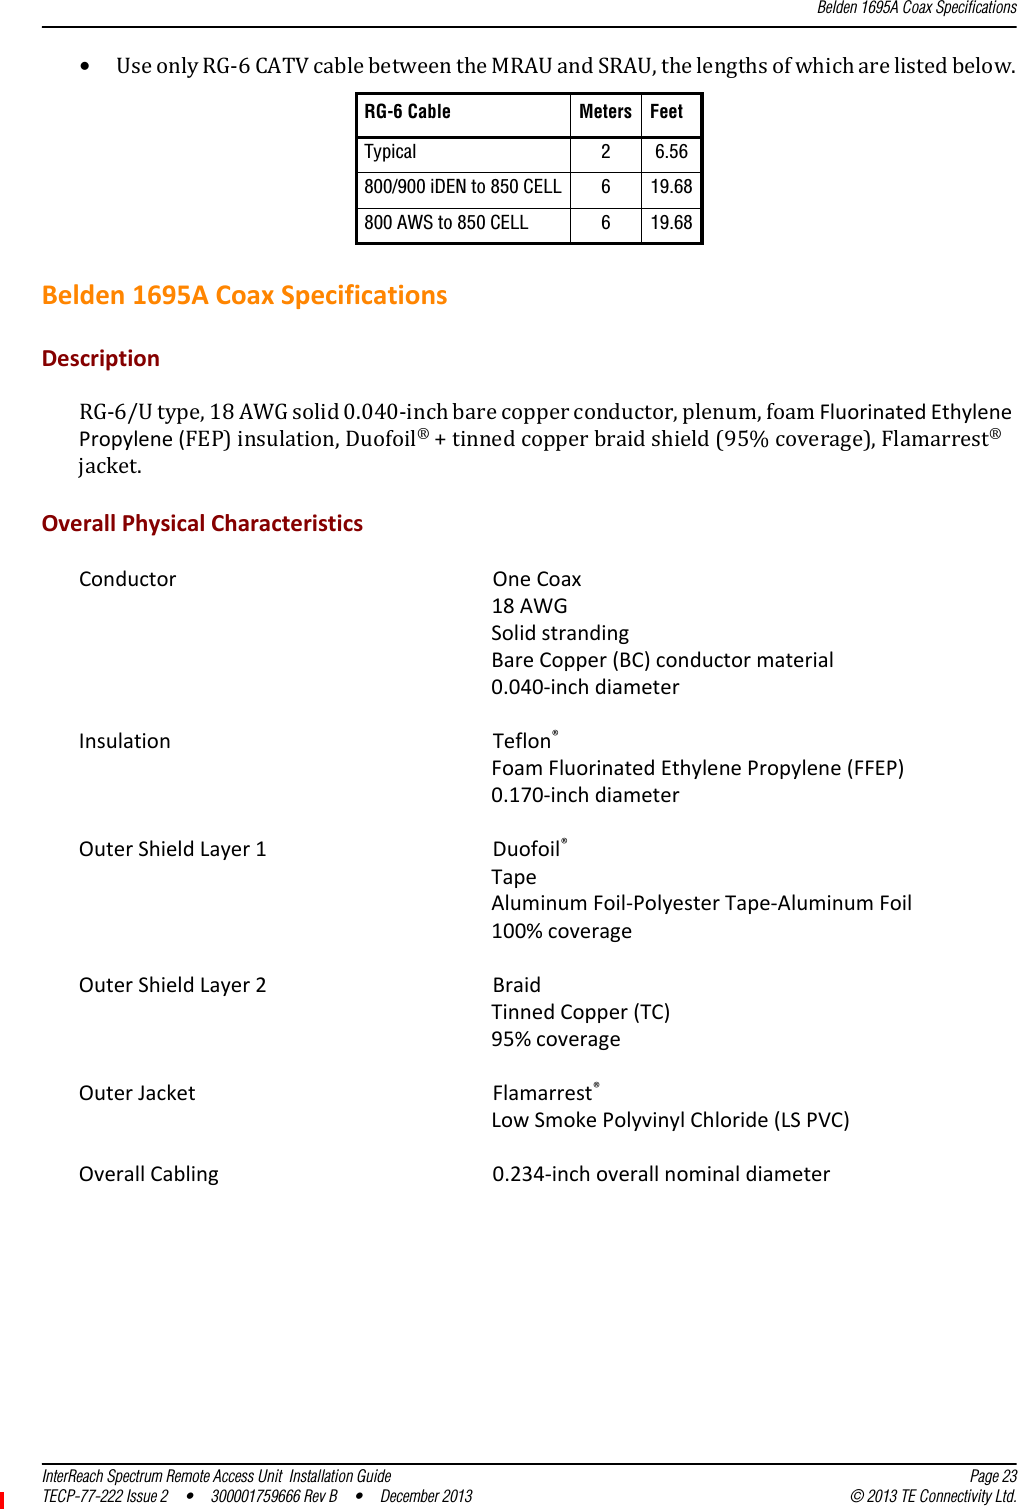 Belden 1695A Coax SpecificationsInterReach Spectrum Remote Access Unit  Installation Guide Page 23TECP-77-222 Issue 2  •  300001759666 Rev B  •  December 2013 © 2013 TE Connectivity Ltd.•UseonlyRG‐6CATVcablebetweentheMRAUandSRAU,thelengthsofwhicharelistedbelow.Belden1695ACoaxSpecificationsDescriptionRG‐6/Utype,18AWGsolid0.040‐inchbarecopperconductor,plenum,foamFluorinatedEthylenePropylene(FEP)insulation,Duofoil®+tinnedcopperbraidshield(95%coverage),Flamarrest®jacket.OverallPhysicalCharacteristicsConductor OneCoax18AWGSolidstrandingBareCopper(BC)conductormaterial0.040‐inchdiameterInsulation Teflon®FoamFluorinatedEthylenePropylene(FFEP)0.170‐inchdiameterOuterShieldLayer1Duofoil®TapeAluminumFoil‐PolyesterTape‐AluminumFoil100%coverageOuterShieldLayer2BraidTinnedCopper(TC)95%coverageOuterJacket Flamarrest®LowSmokePolyvinylChloride(LSPVC)OverallCabling 0.234‐inchoverallnominaldiameterRG-6 Cable Meters FeetTypical 26.56800/900 iDEN to 850 CELL 619.68800 AWS to 850 CELL 619.68